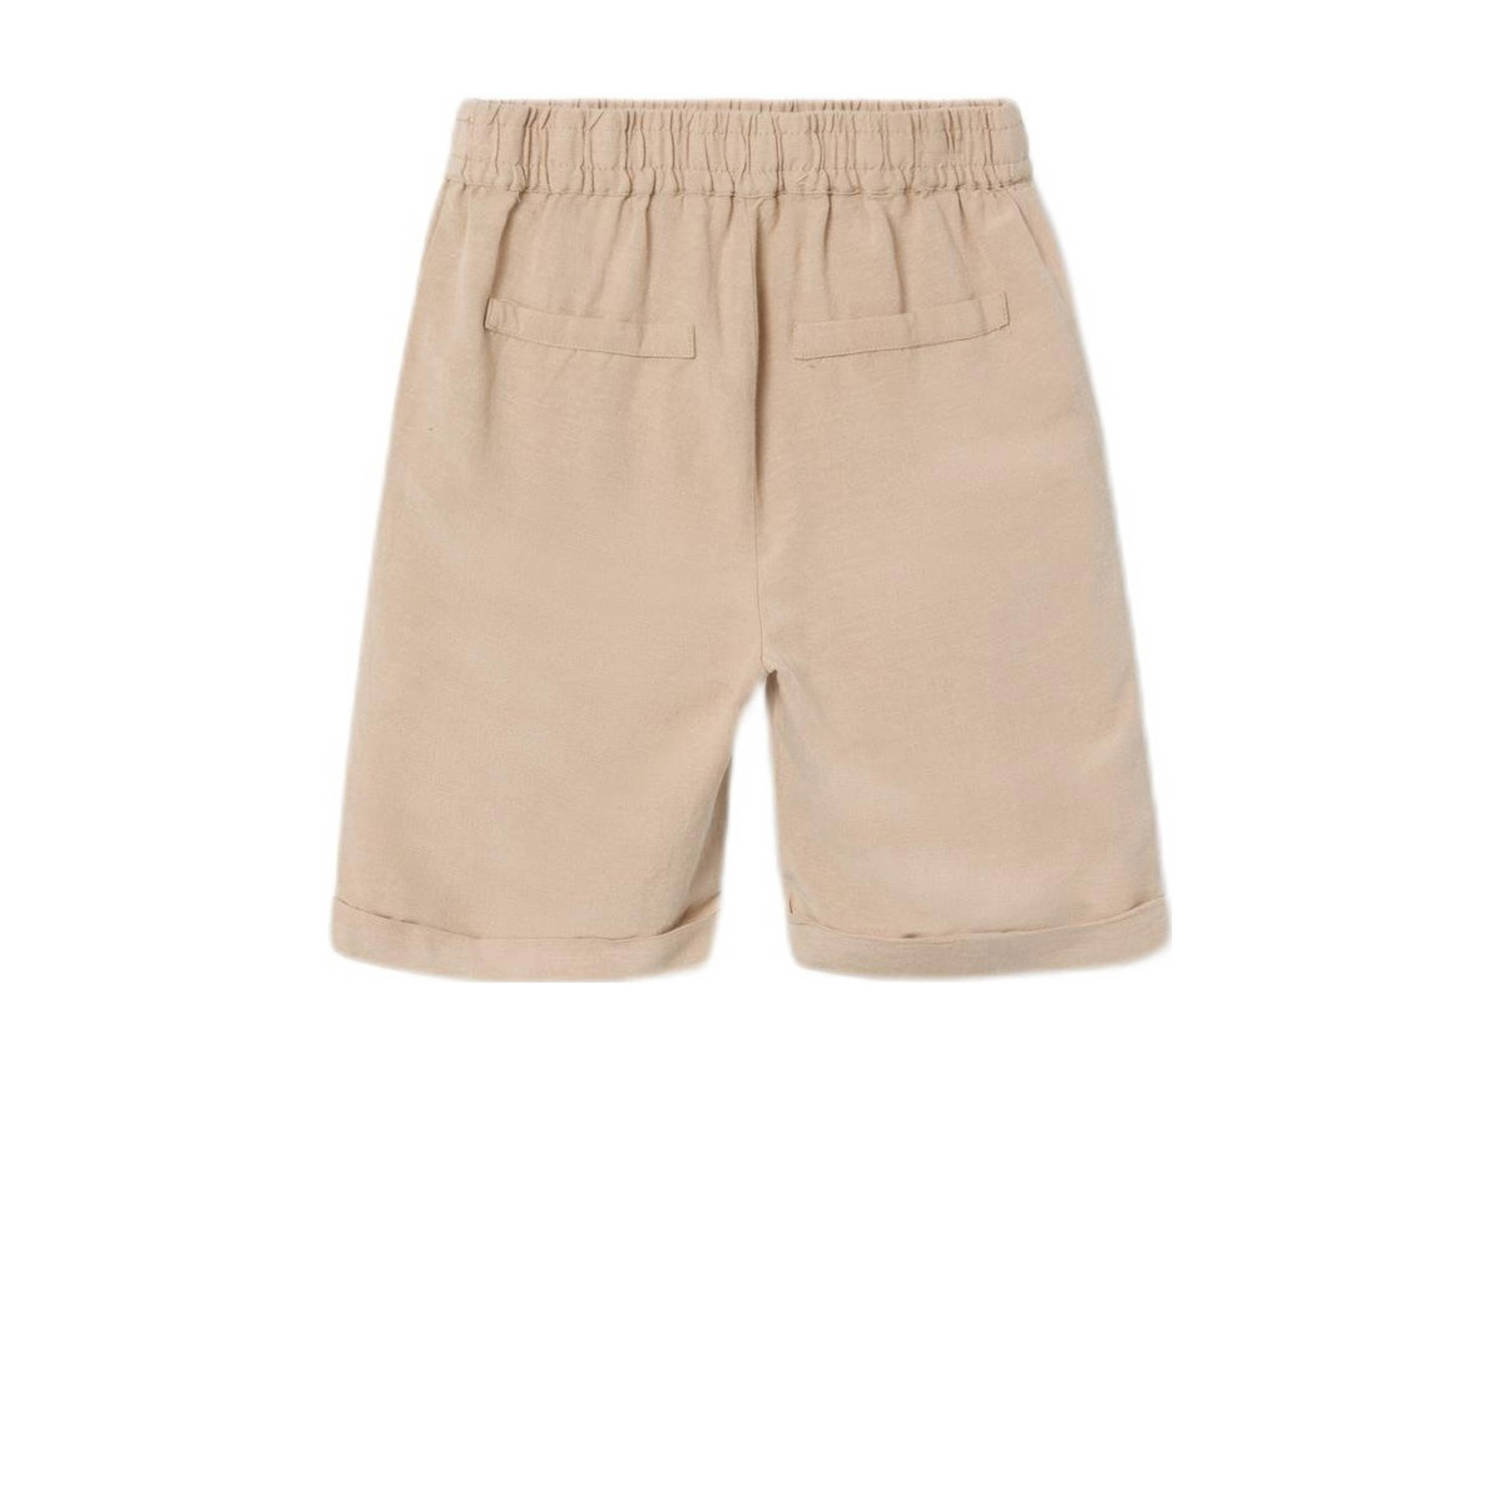 NAME IT KIDS casual short NKMFAHER beige